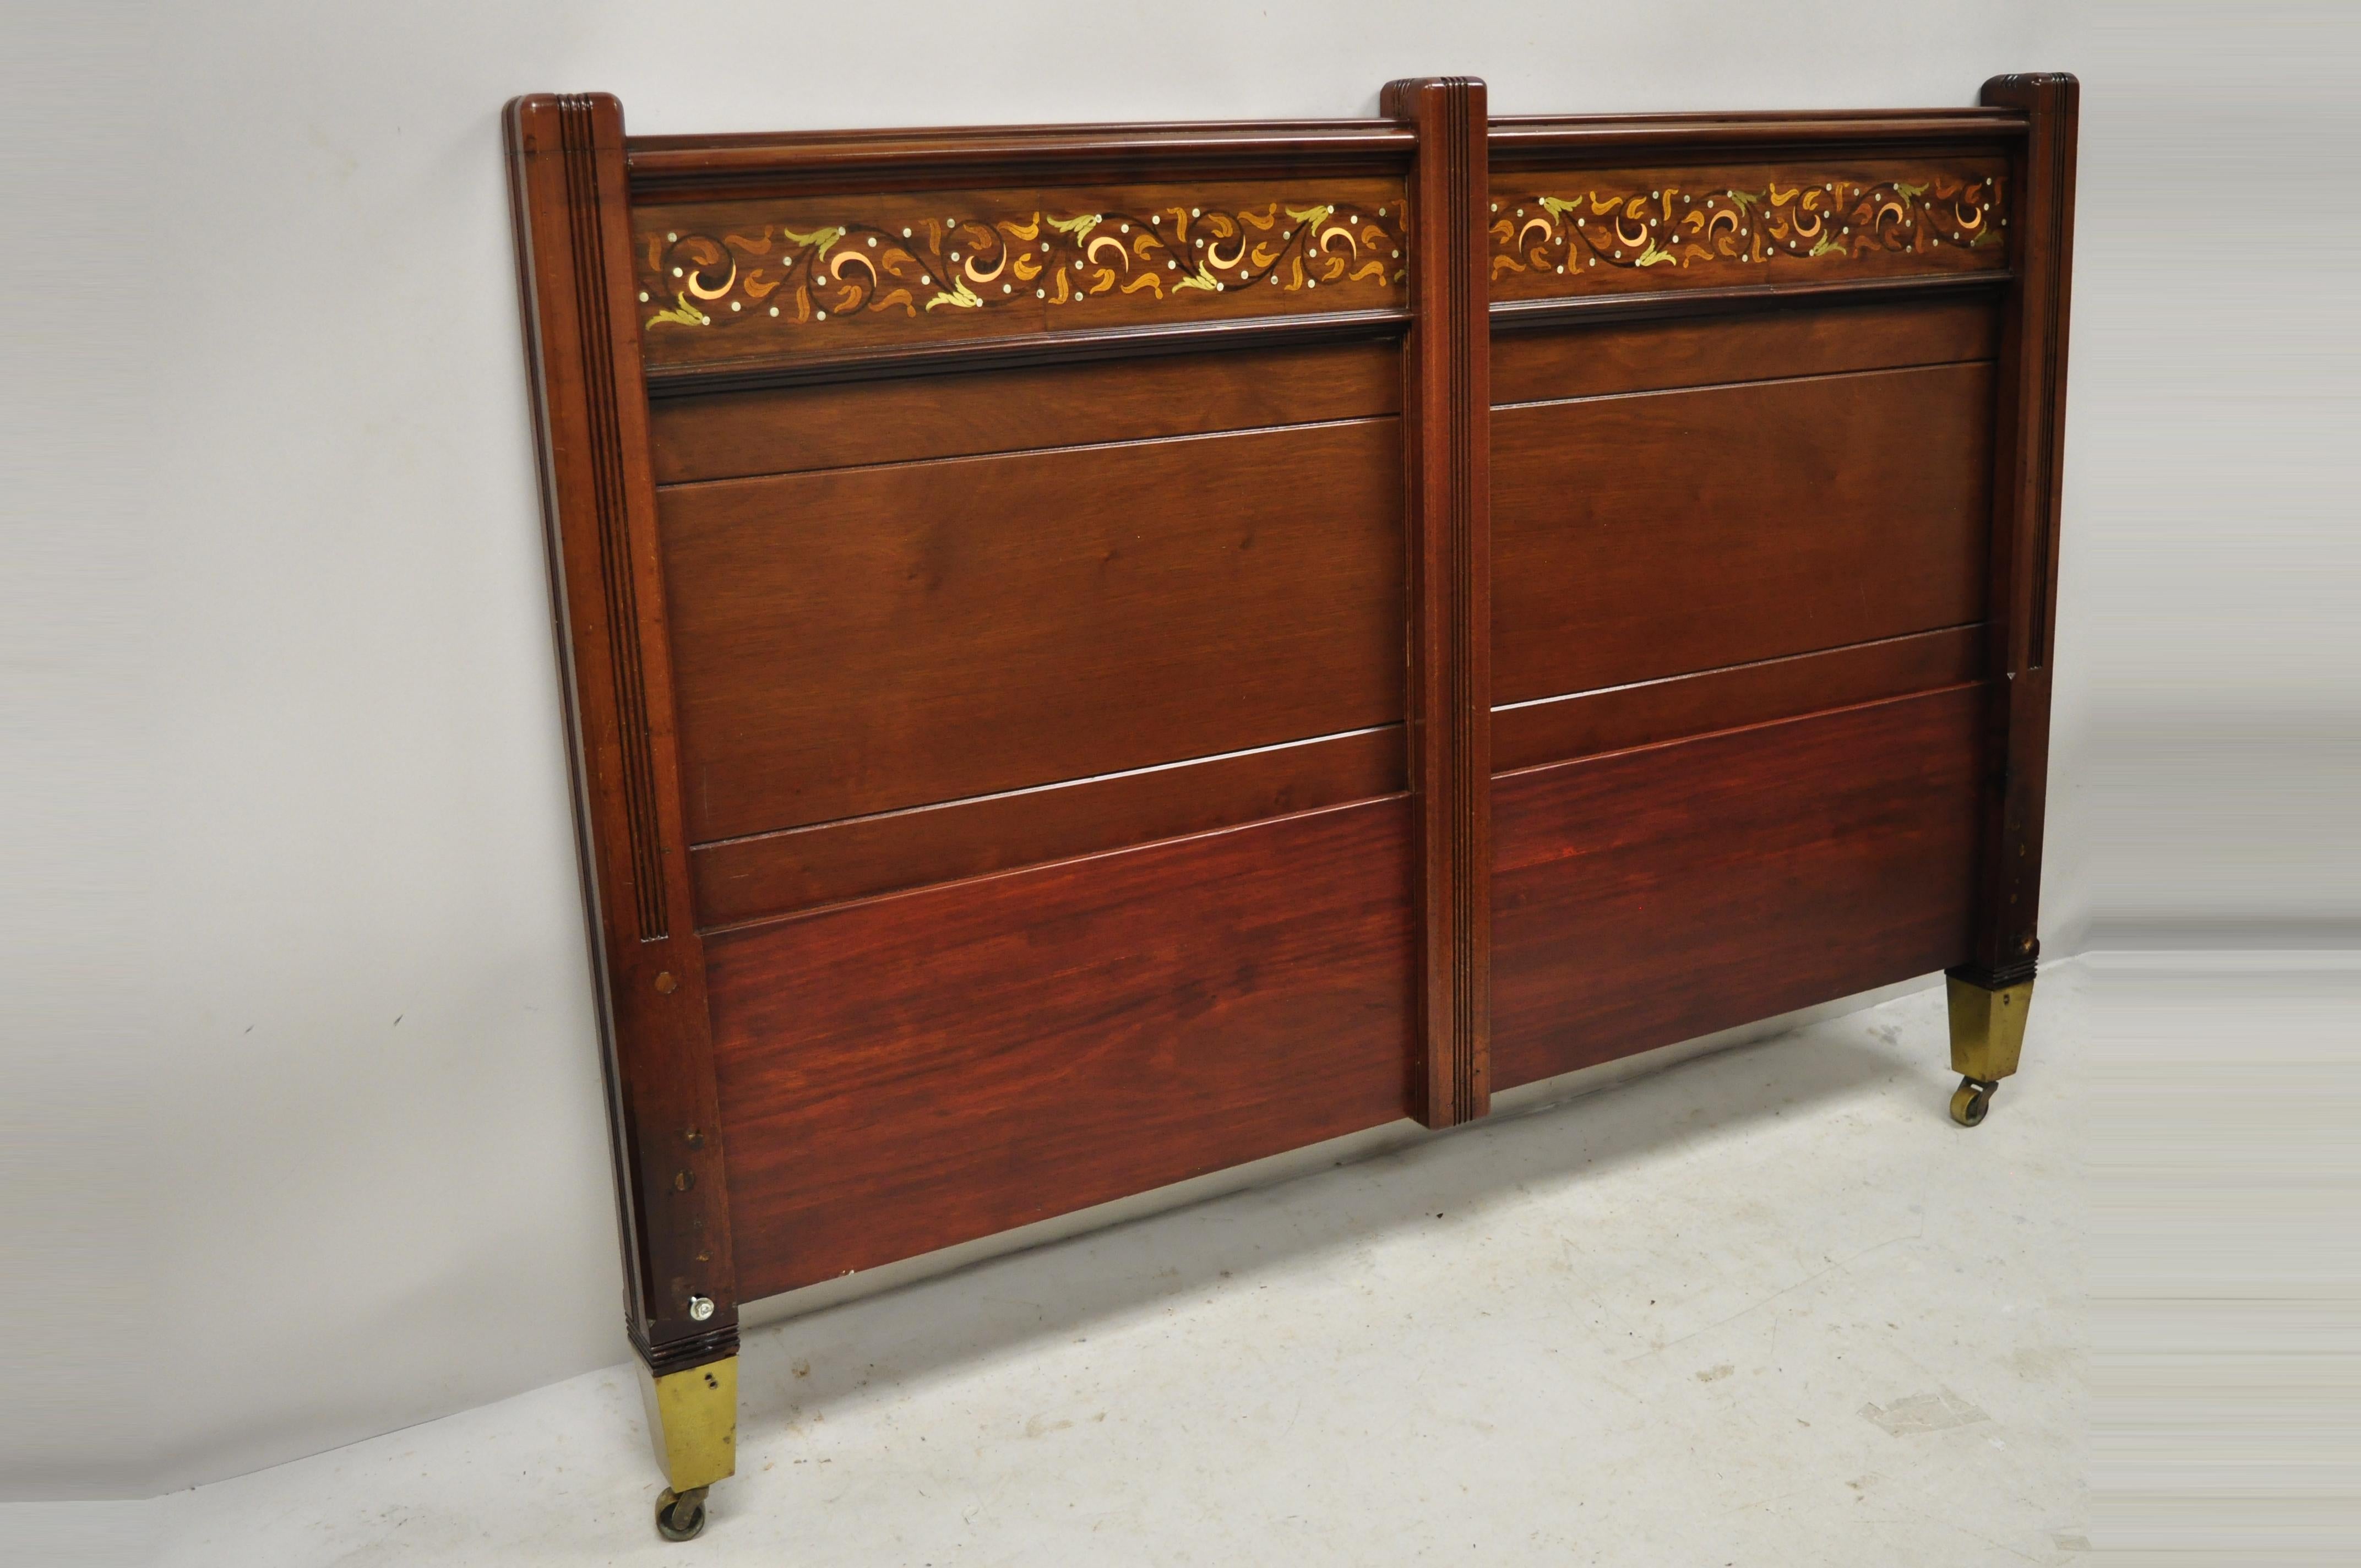 Antique Herts Brothers brass satinwood inlay Edwardian mahogany queen size bed headboard. Item features brass and satinwood scrollwork inlay, brass capped feet, rolling casters, solid wood frame, beautiful wood grain, unmarked, quality American